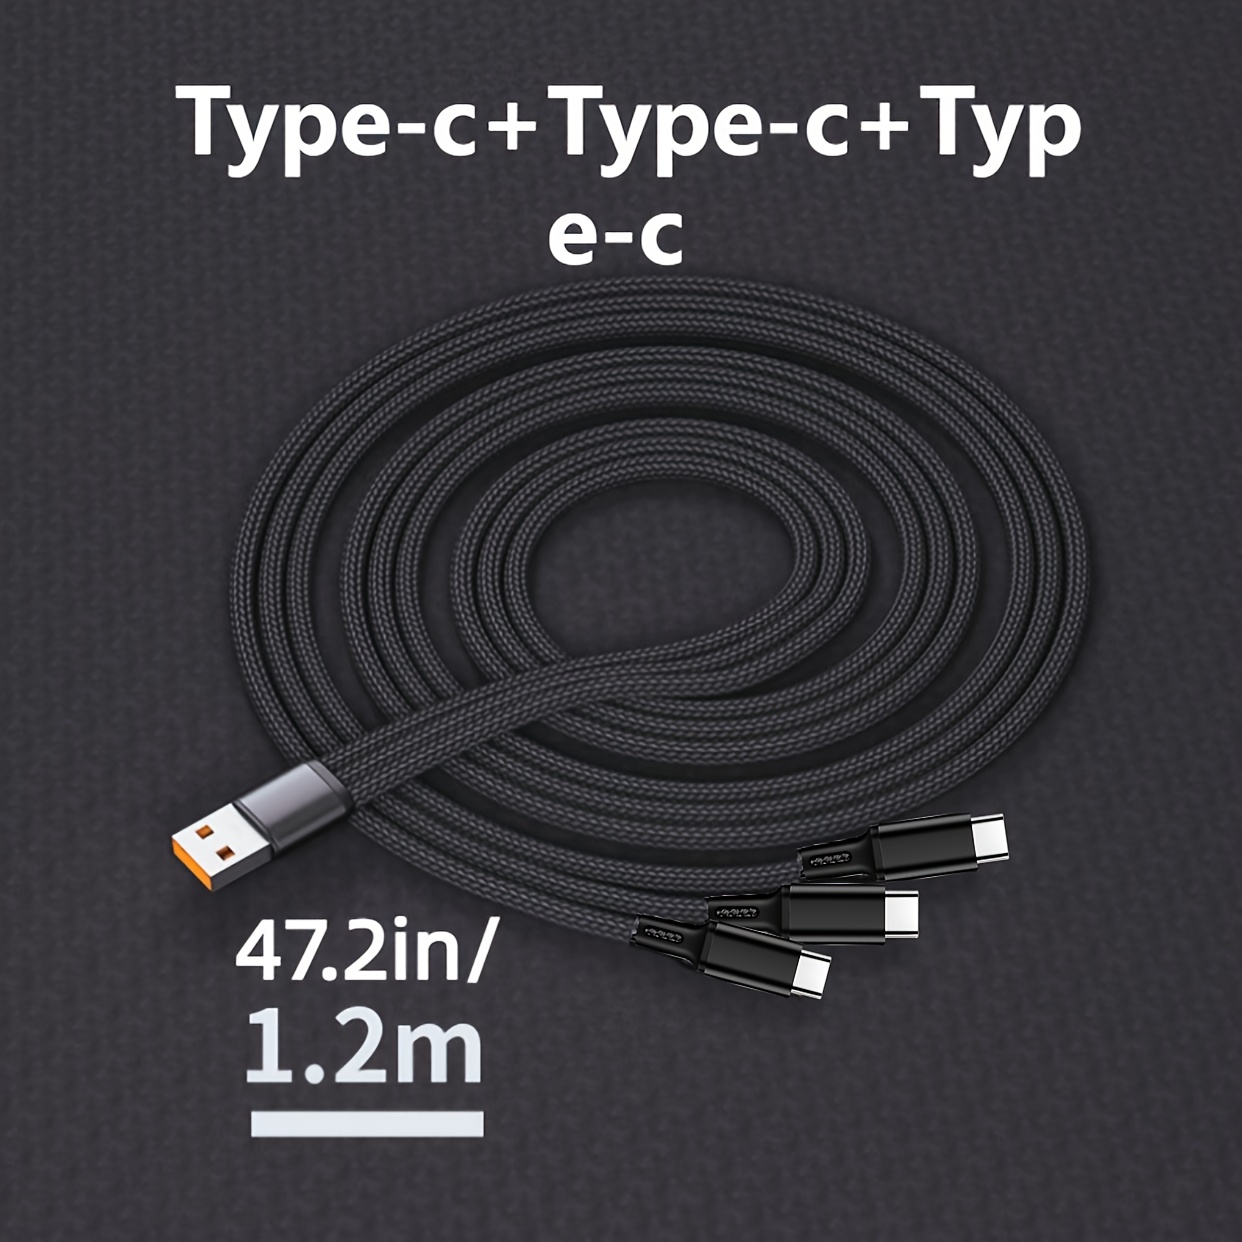 

1pc Of 3-in-1 Charging Cable, Usb A To Type-c+ Micro Usb Charging Cable, Nylon Braided Cable With 3x0.2/1.2m Length, 3a Fast Charging, Compatible With Smartphones/android And More